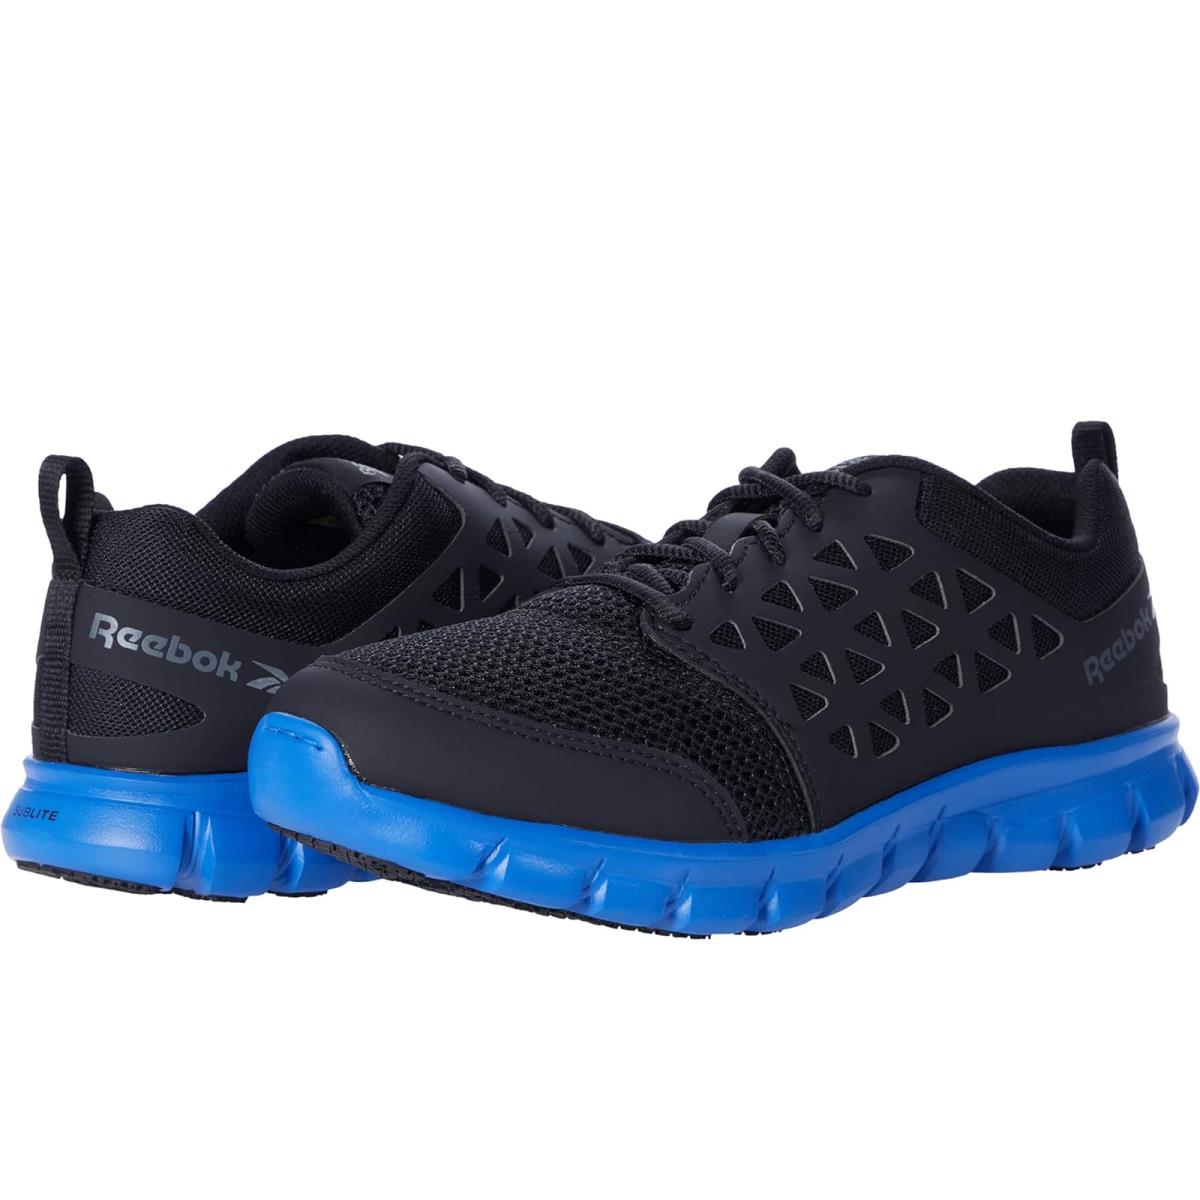 Man`s Shoes Reebok Work Day One Safety Sublite 2.0 EH Soft Toe Black